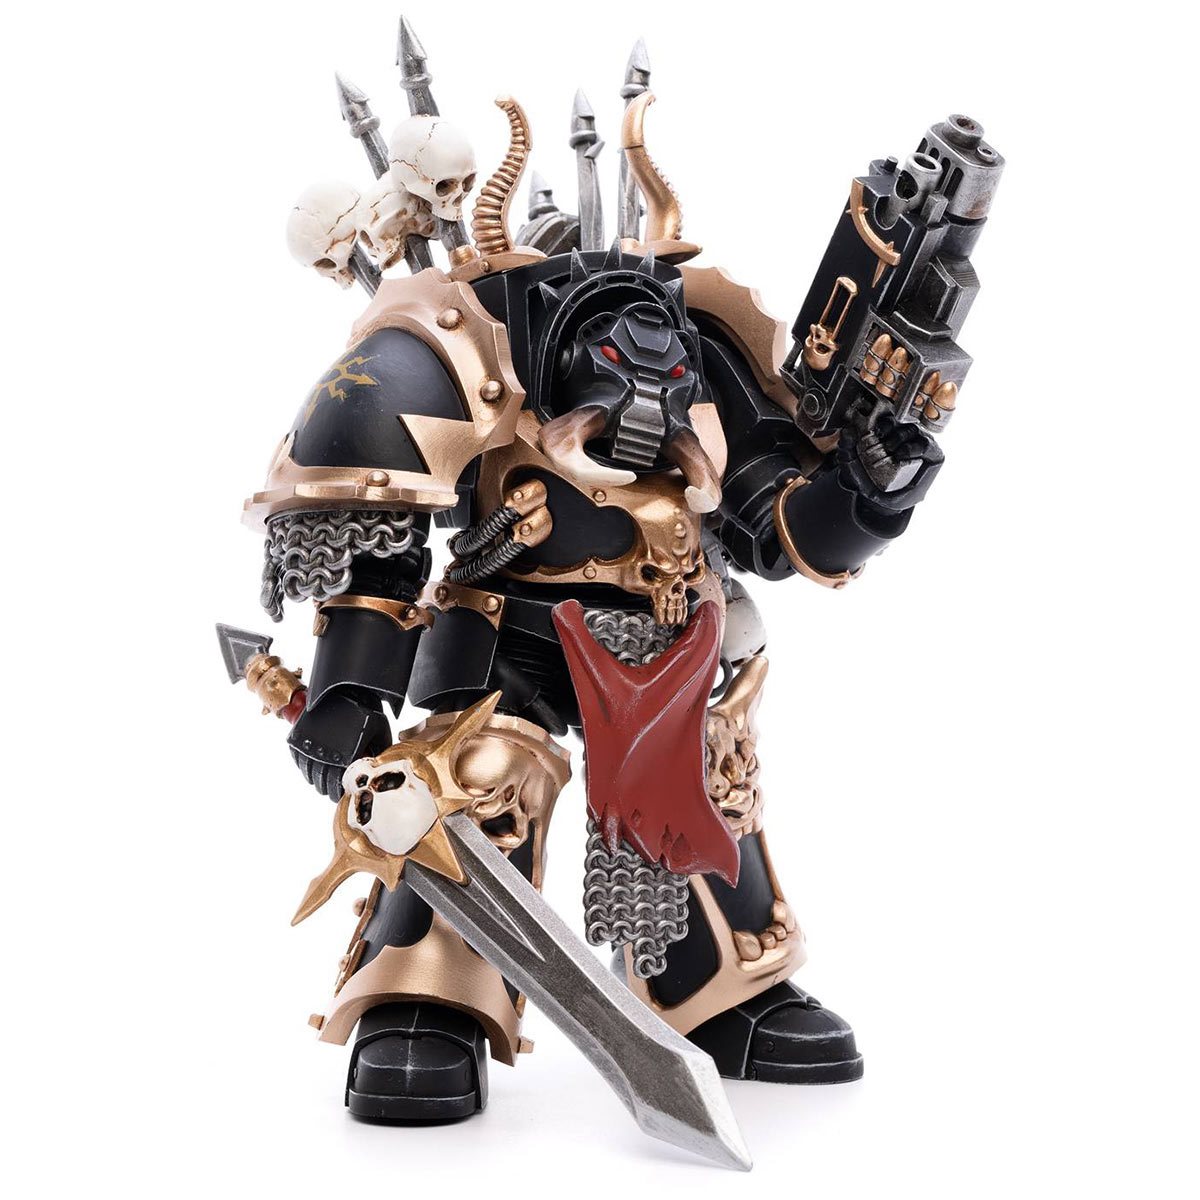 Joy Toy Warhammer 40,000 Chaos Space Marines Black Legion Chaos Terminator Brother Gnarl 1:18 Scale Action Figure